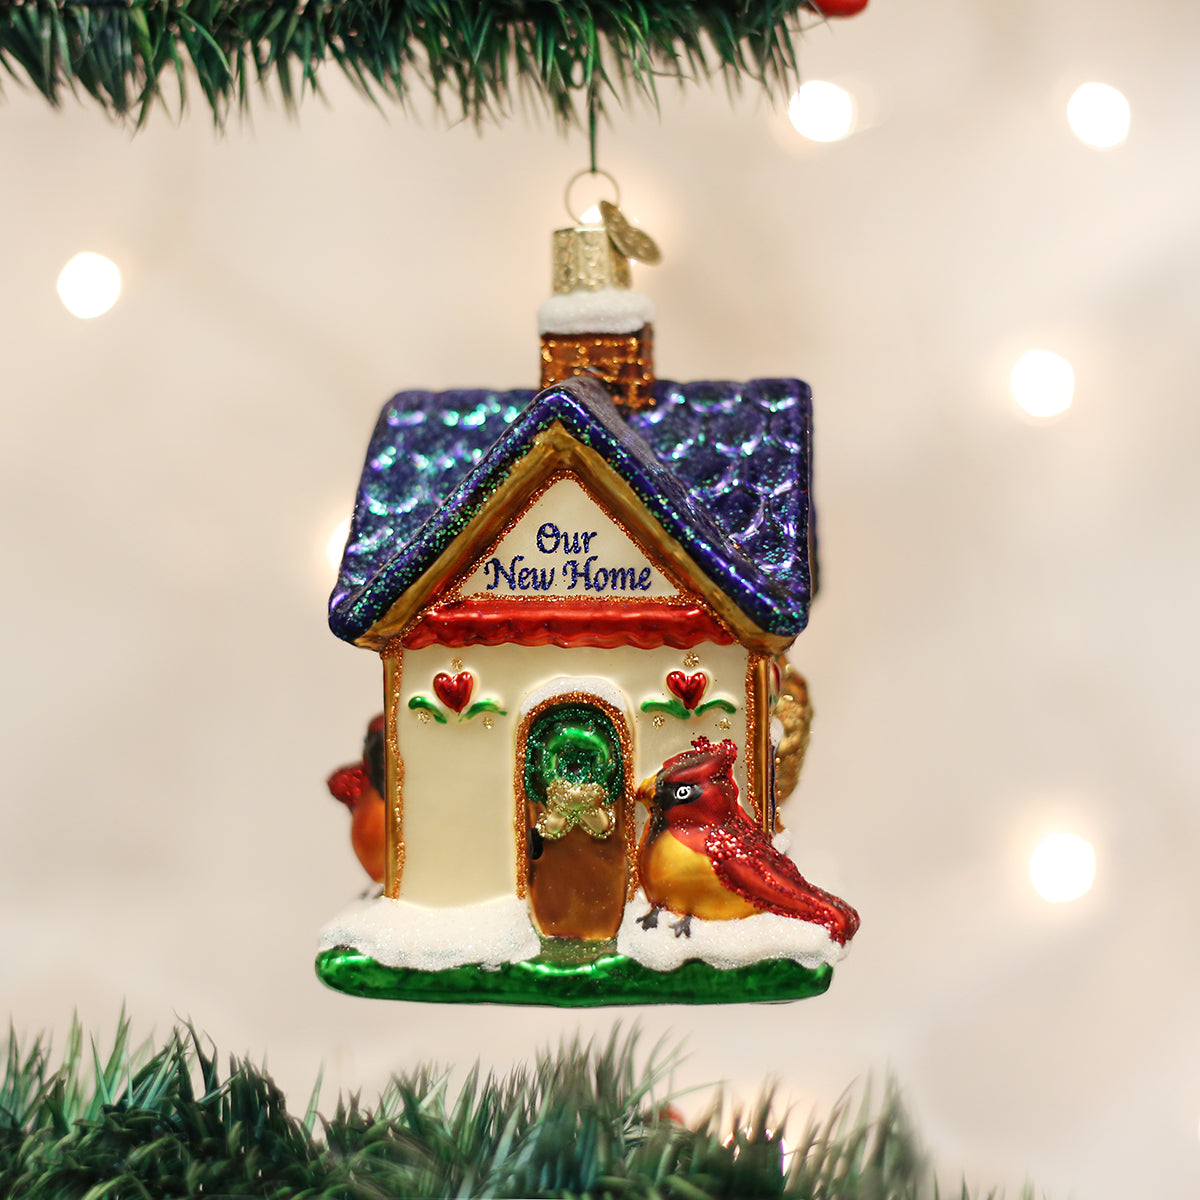 Our New Home Ornament | Old World Christmas™